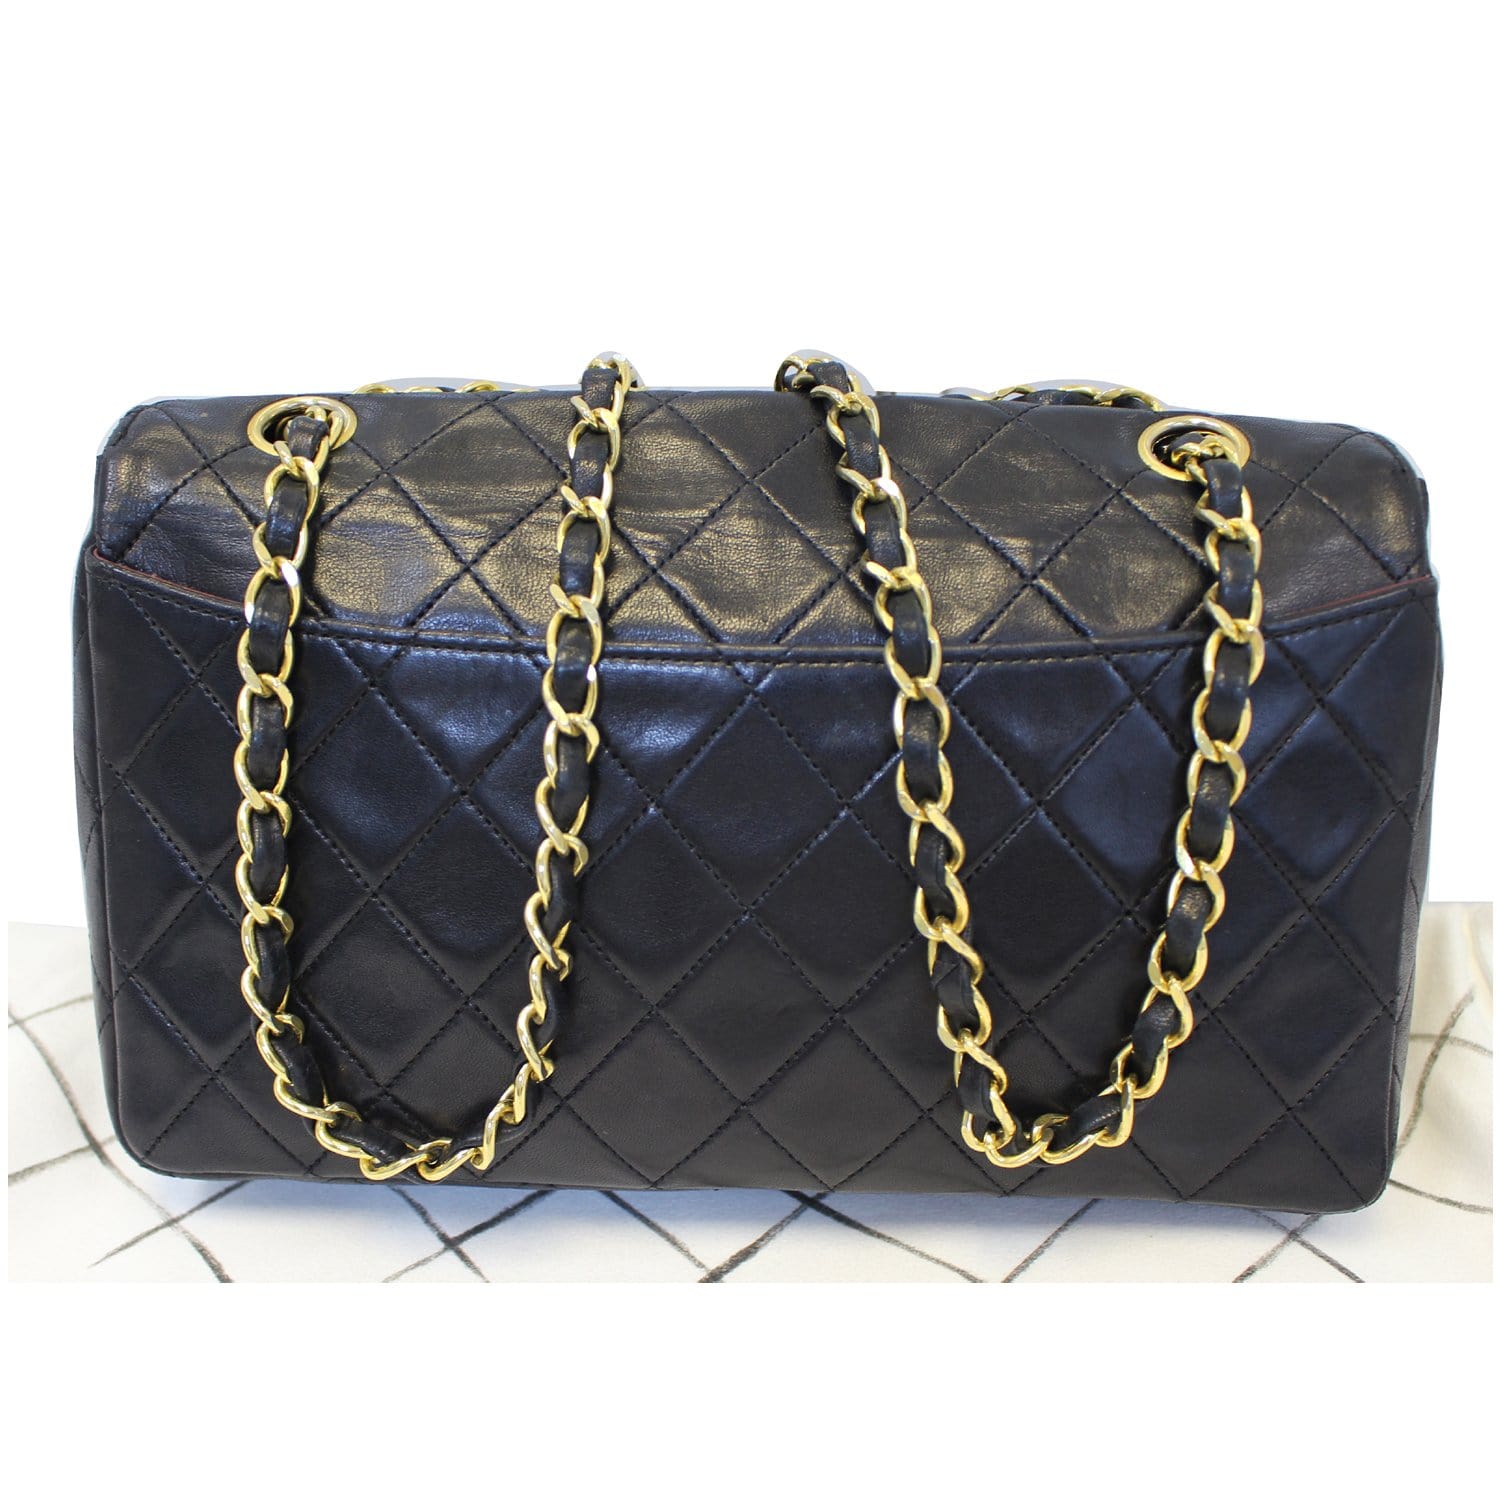 Auth CHANEL Black Quilted Lambskin Leather Crossbody Shoulder Flap Bag  #48322